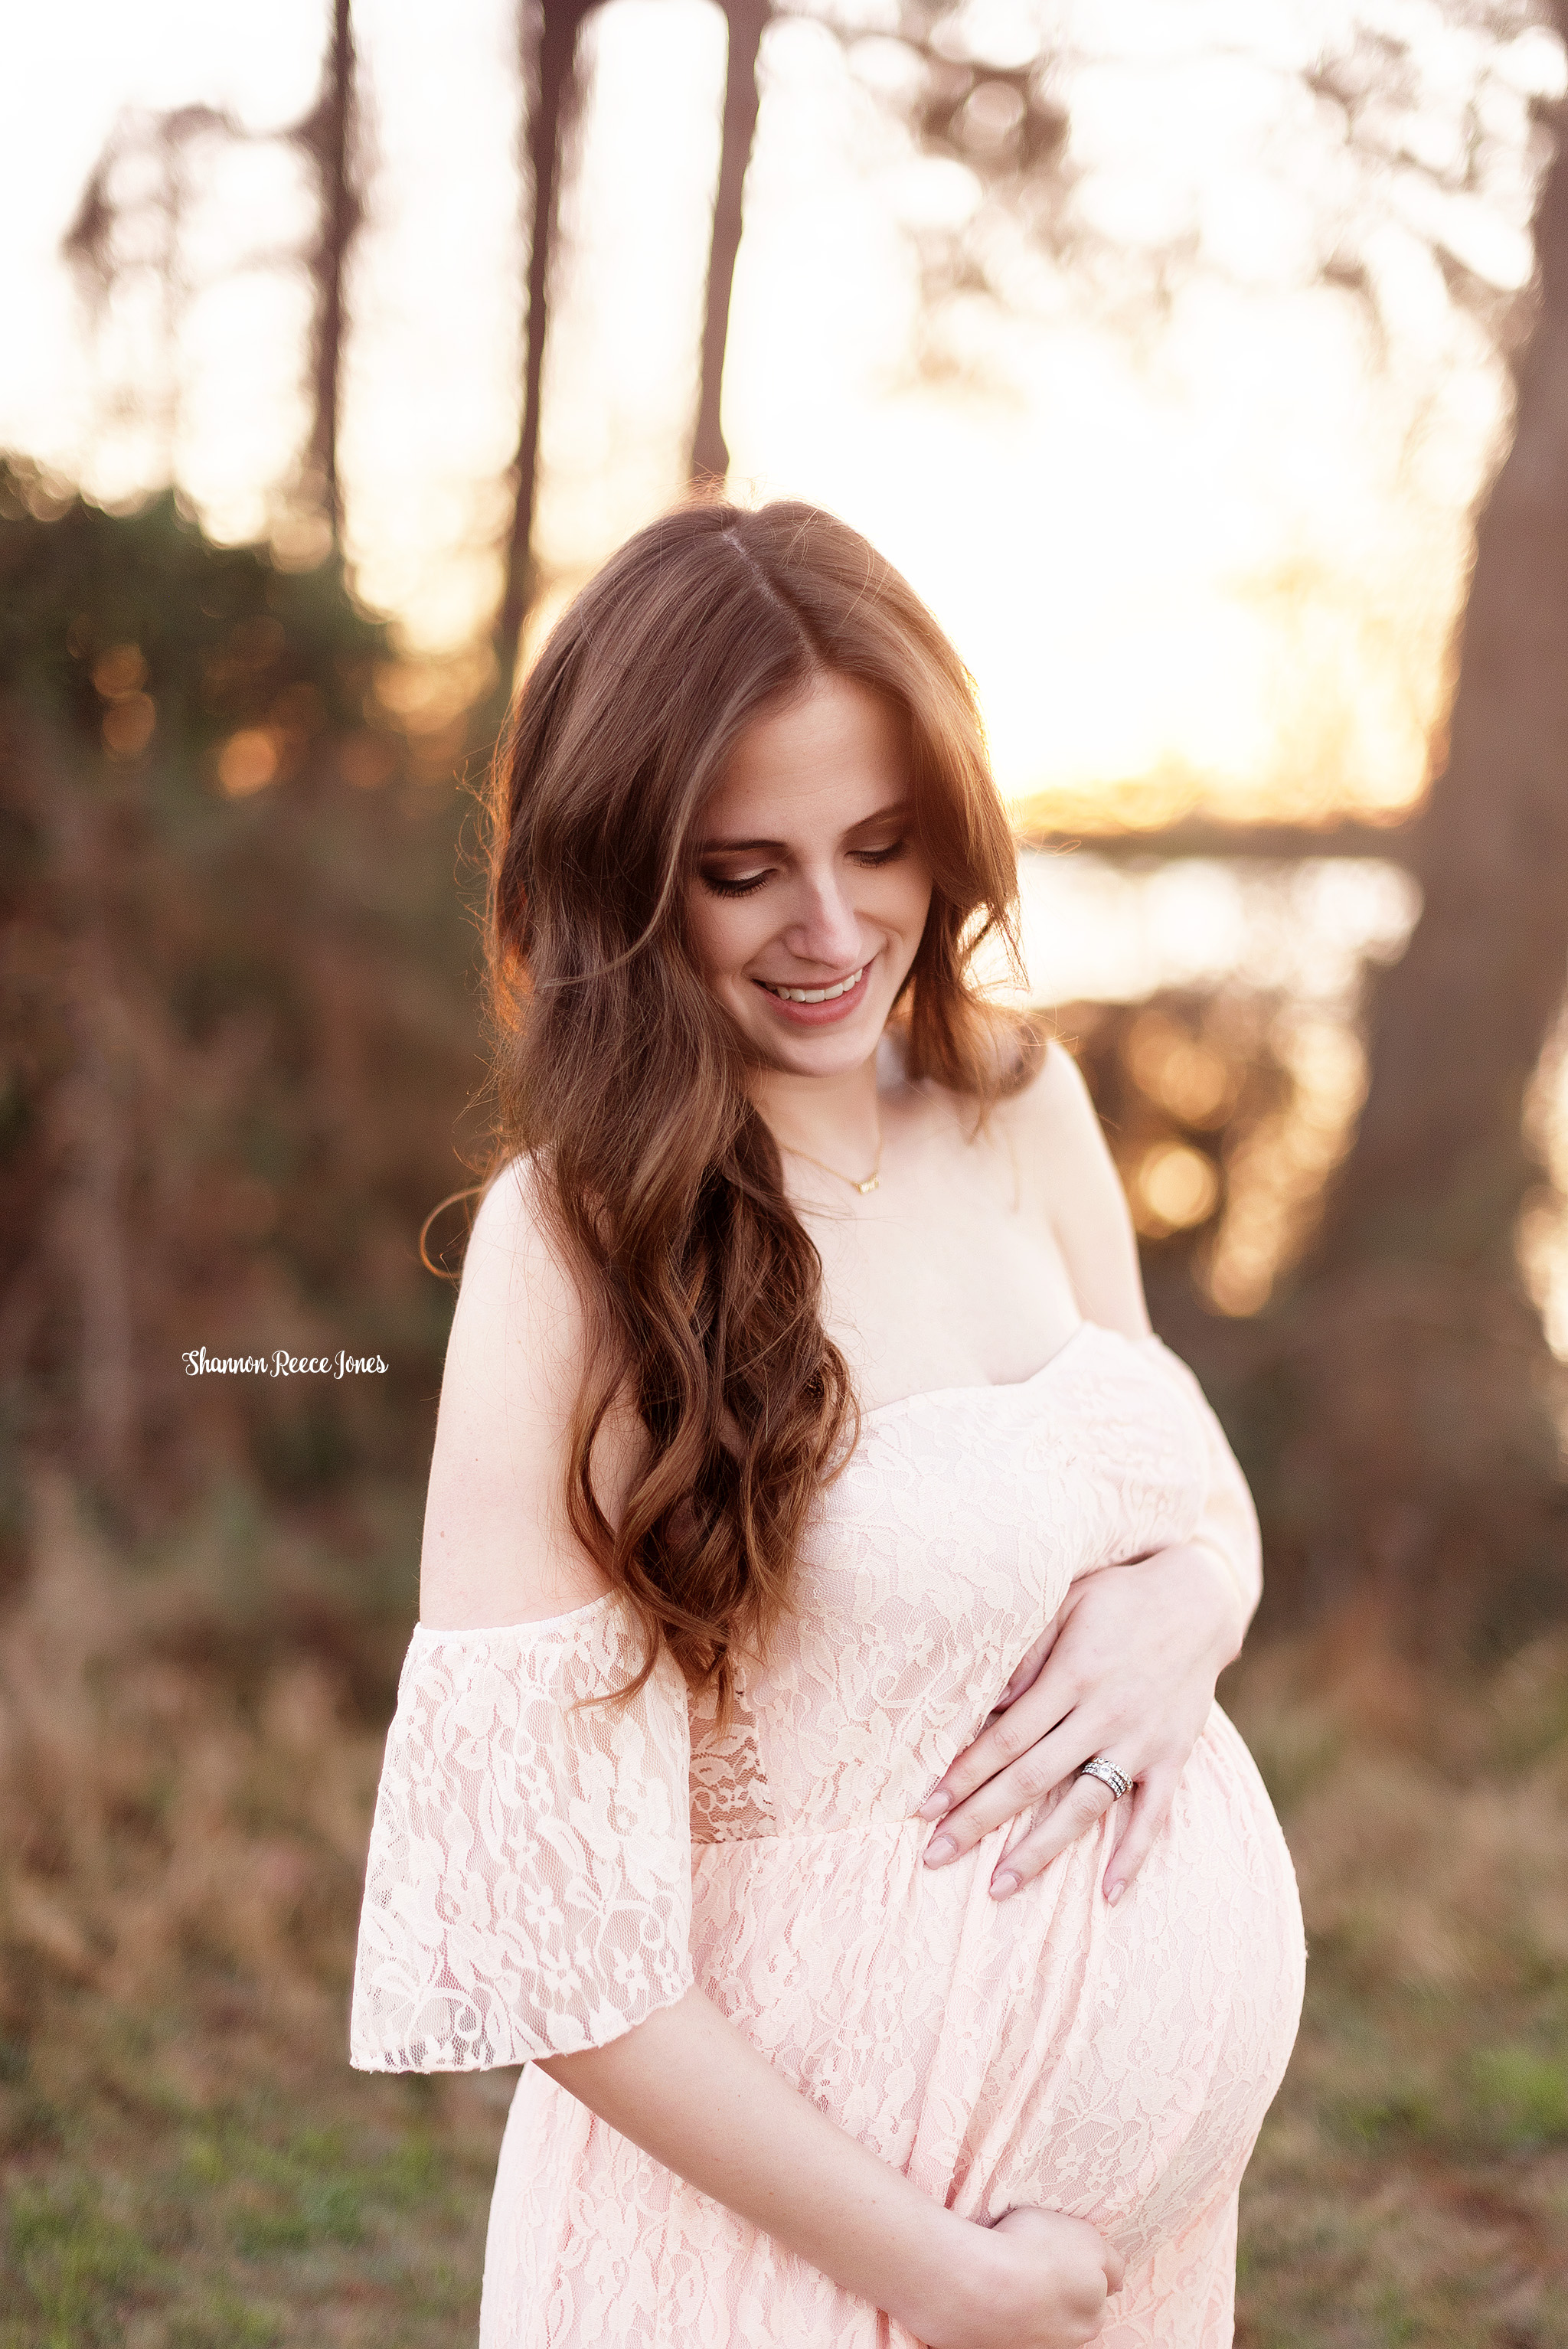 How to Prepare for Your Maternity Session